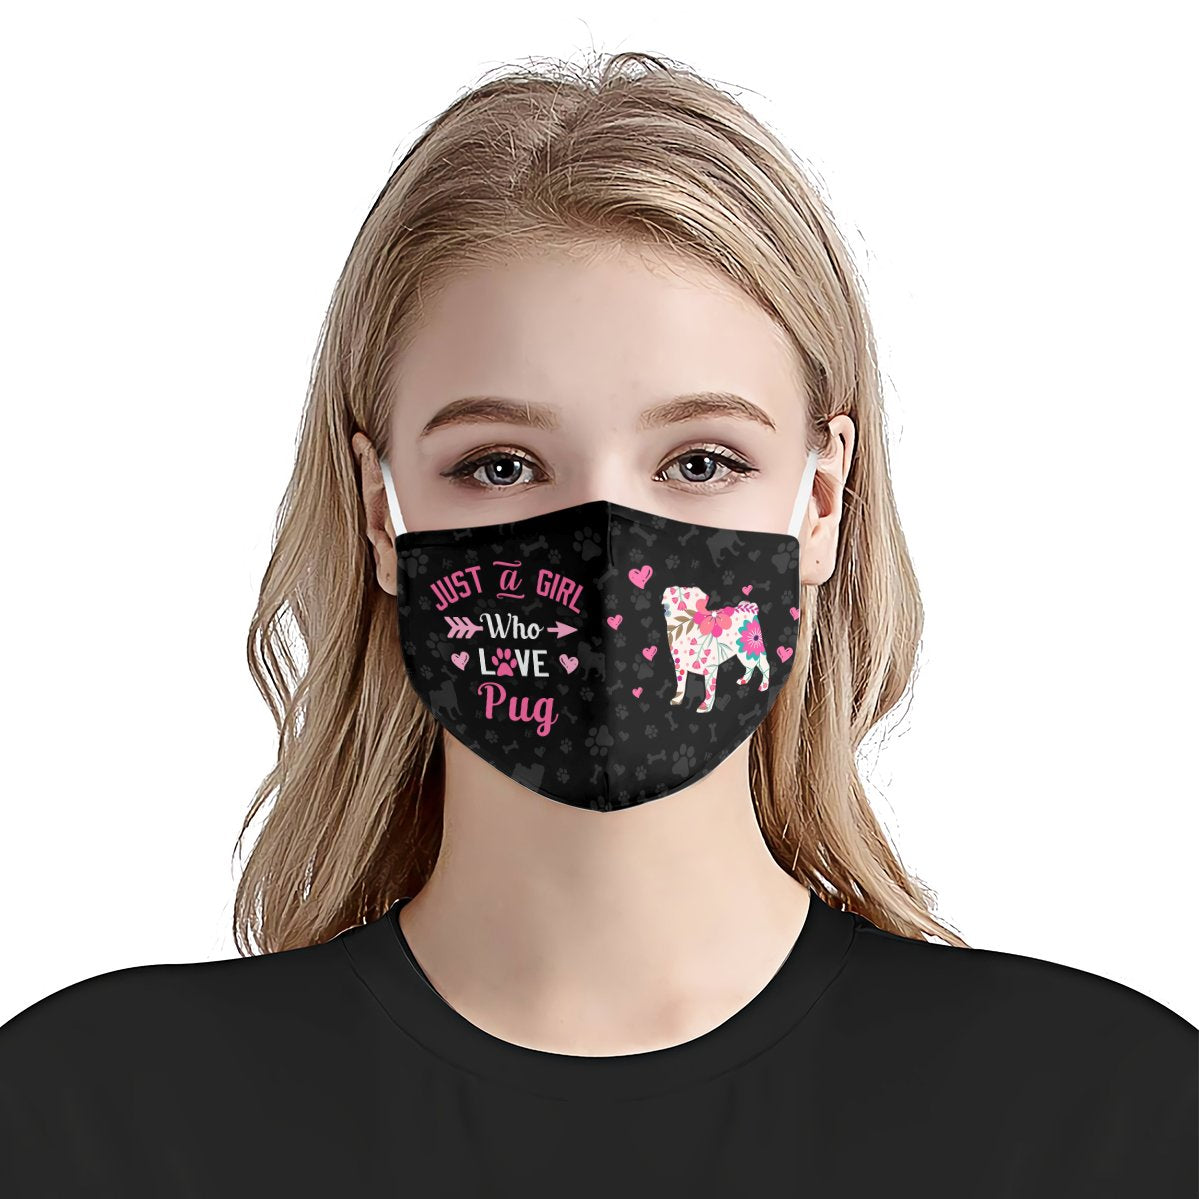 Just A Girl Who Loves Pug EZ07 2807 Face Mask